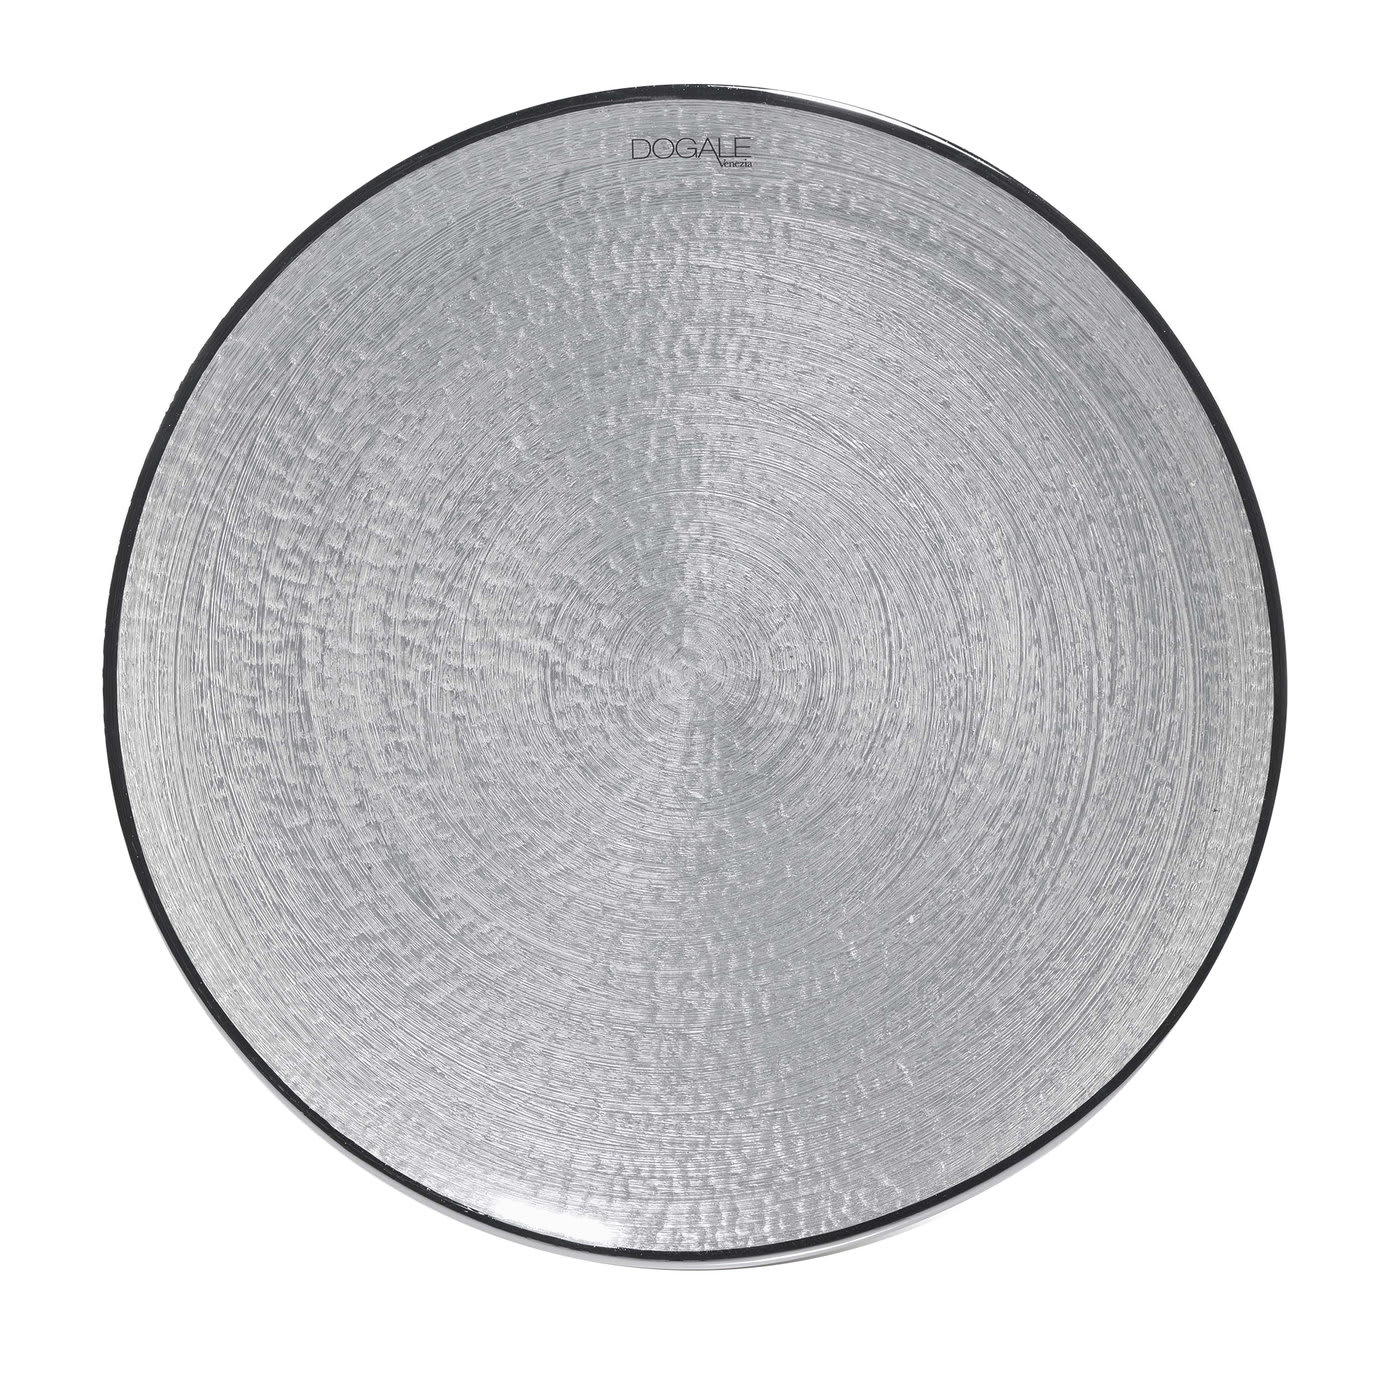 Fenice Silver Plate - Dogale